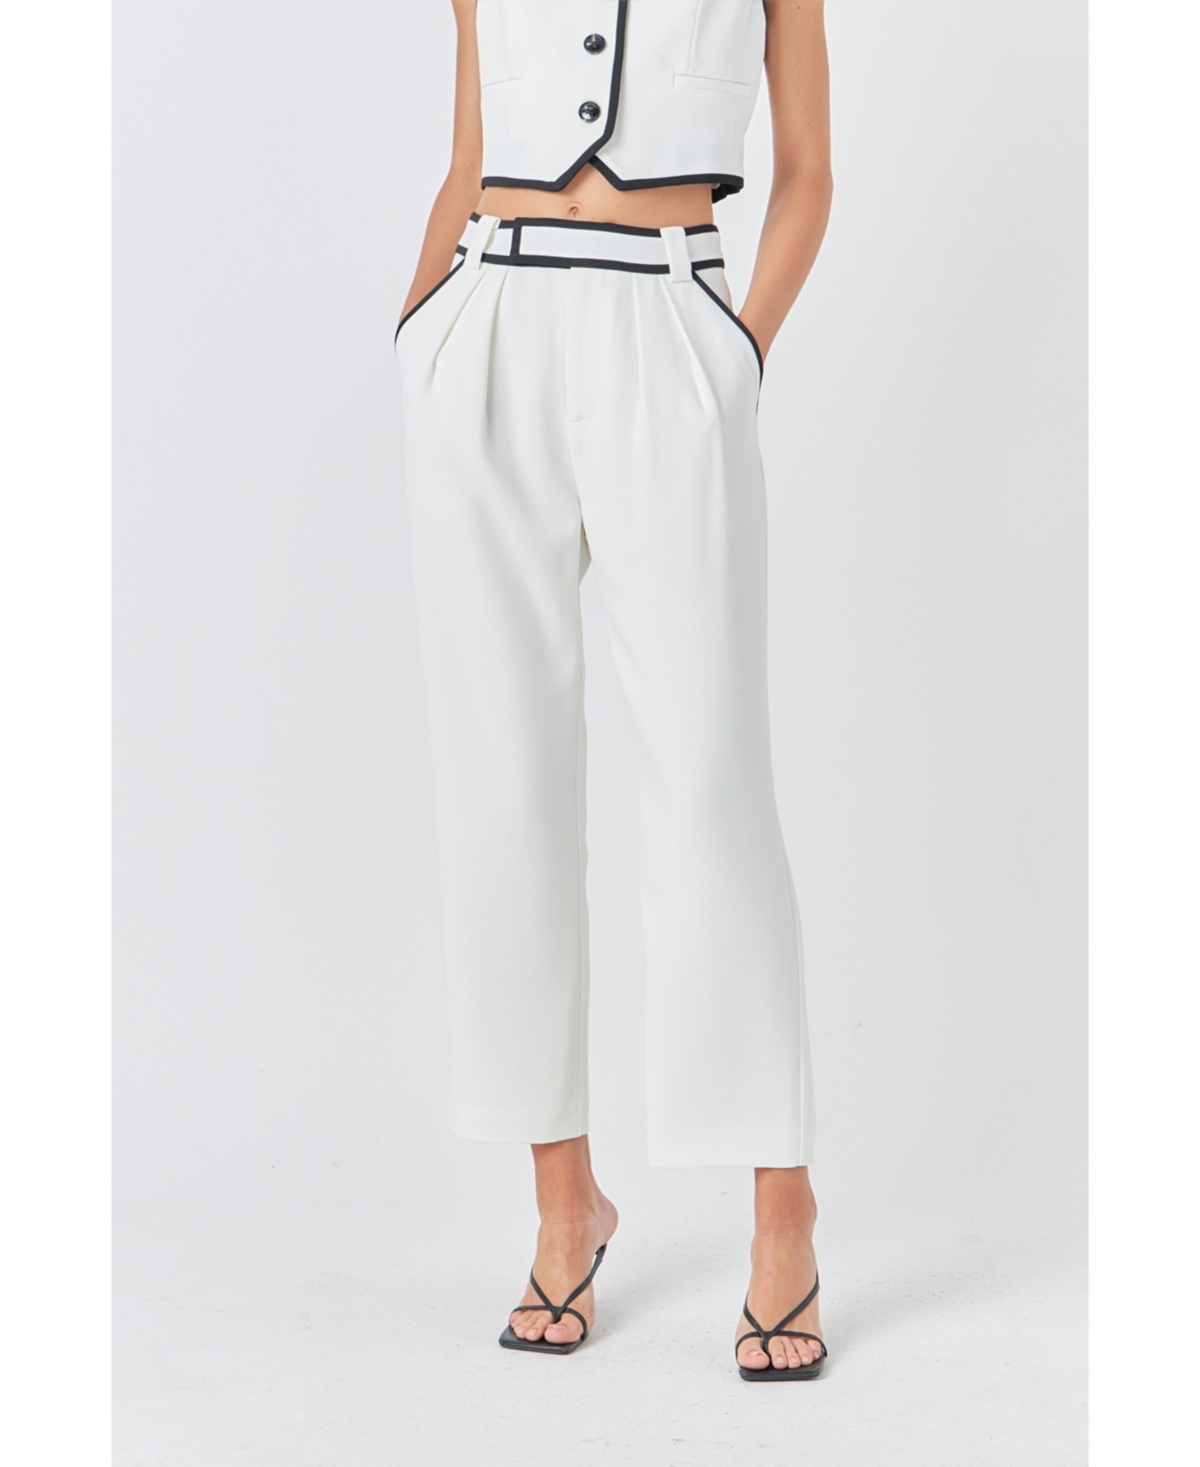 Women's Trousers with Binding Detail - White